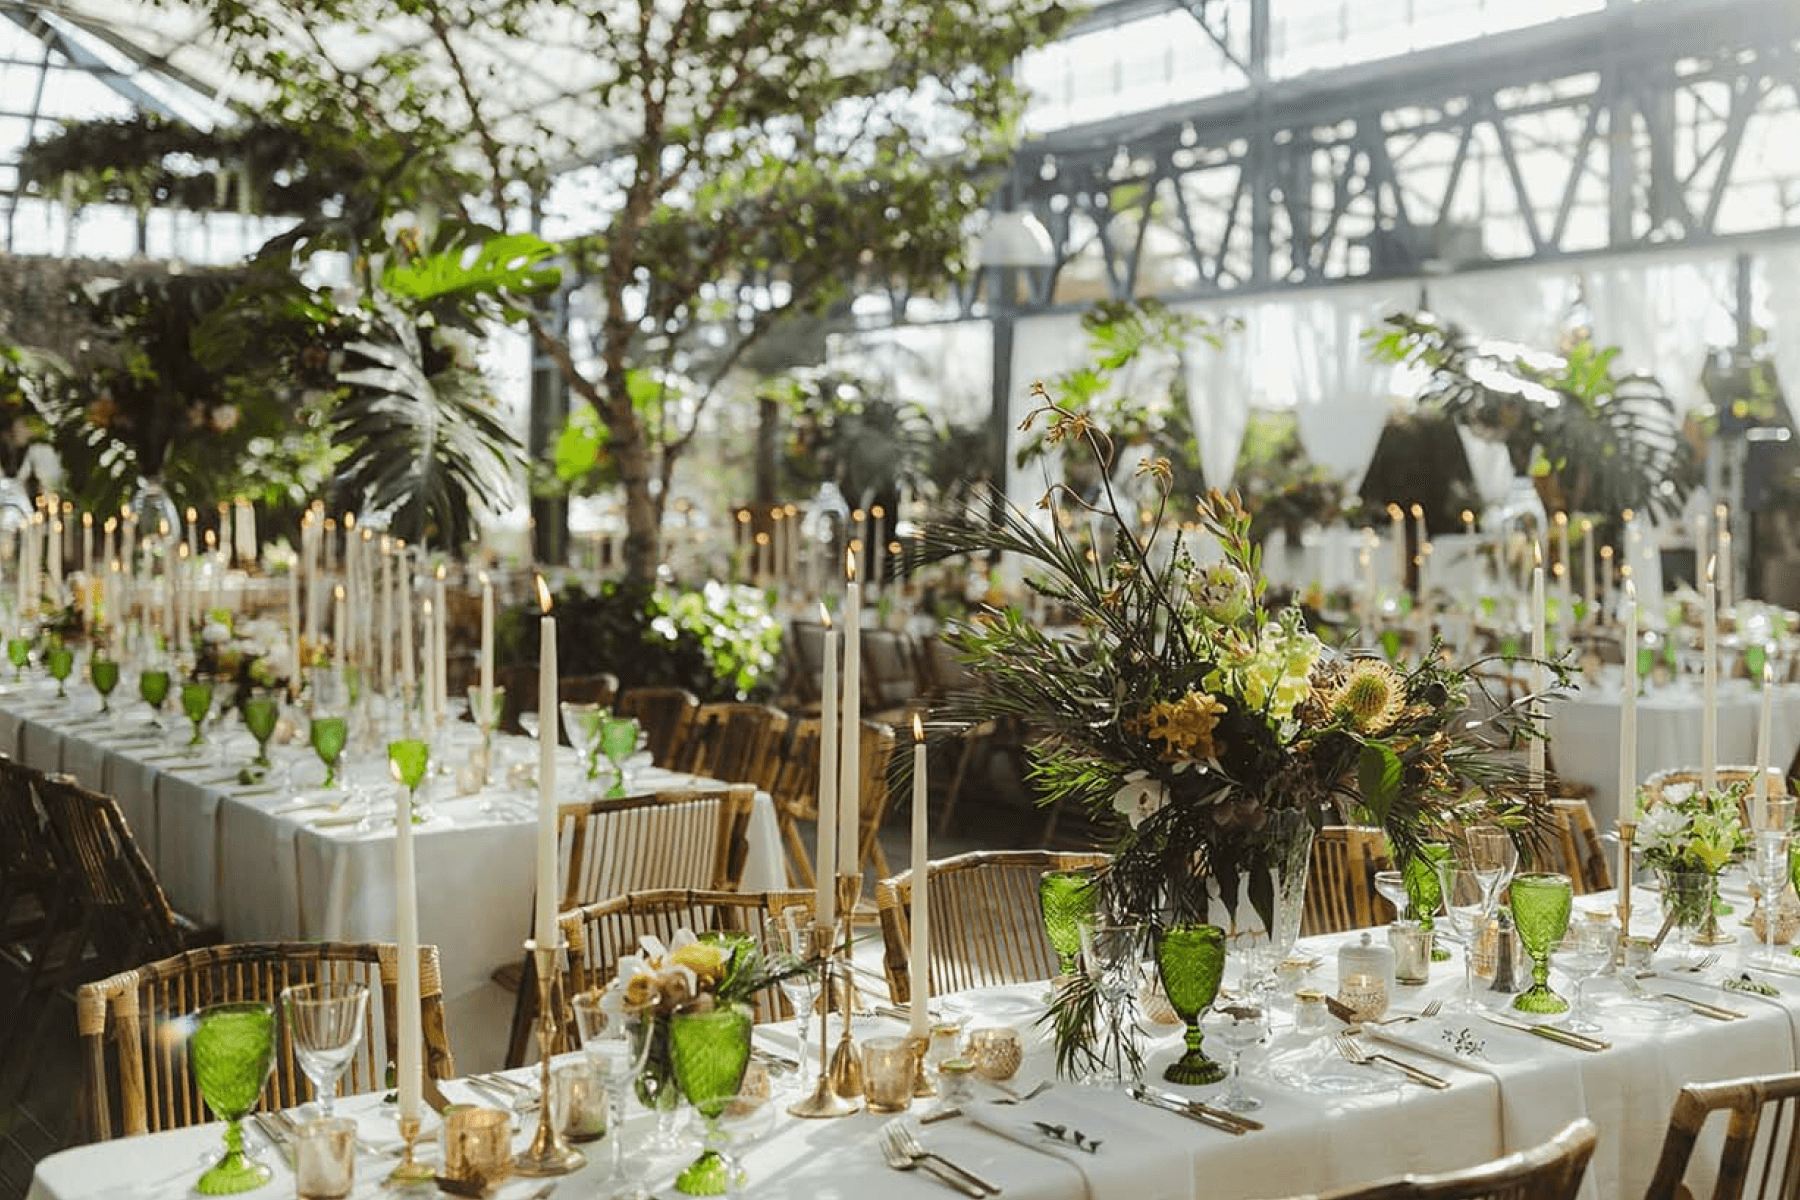 A lush event setting with green and gold tableware and tall candles inside a greenhouse.